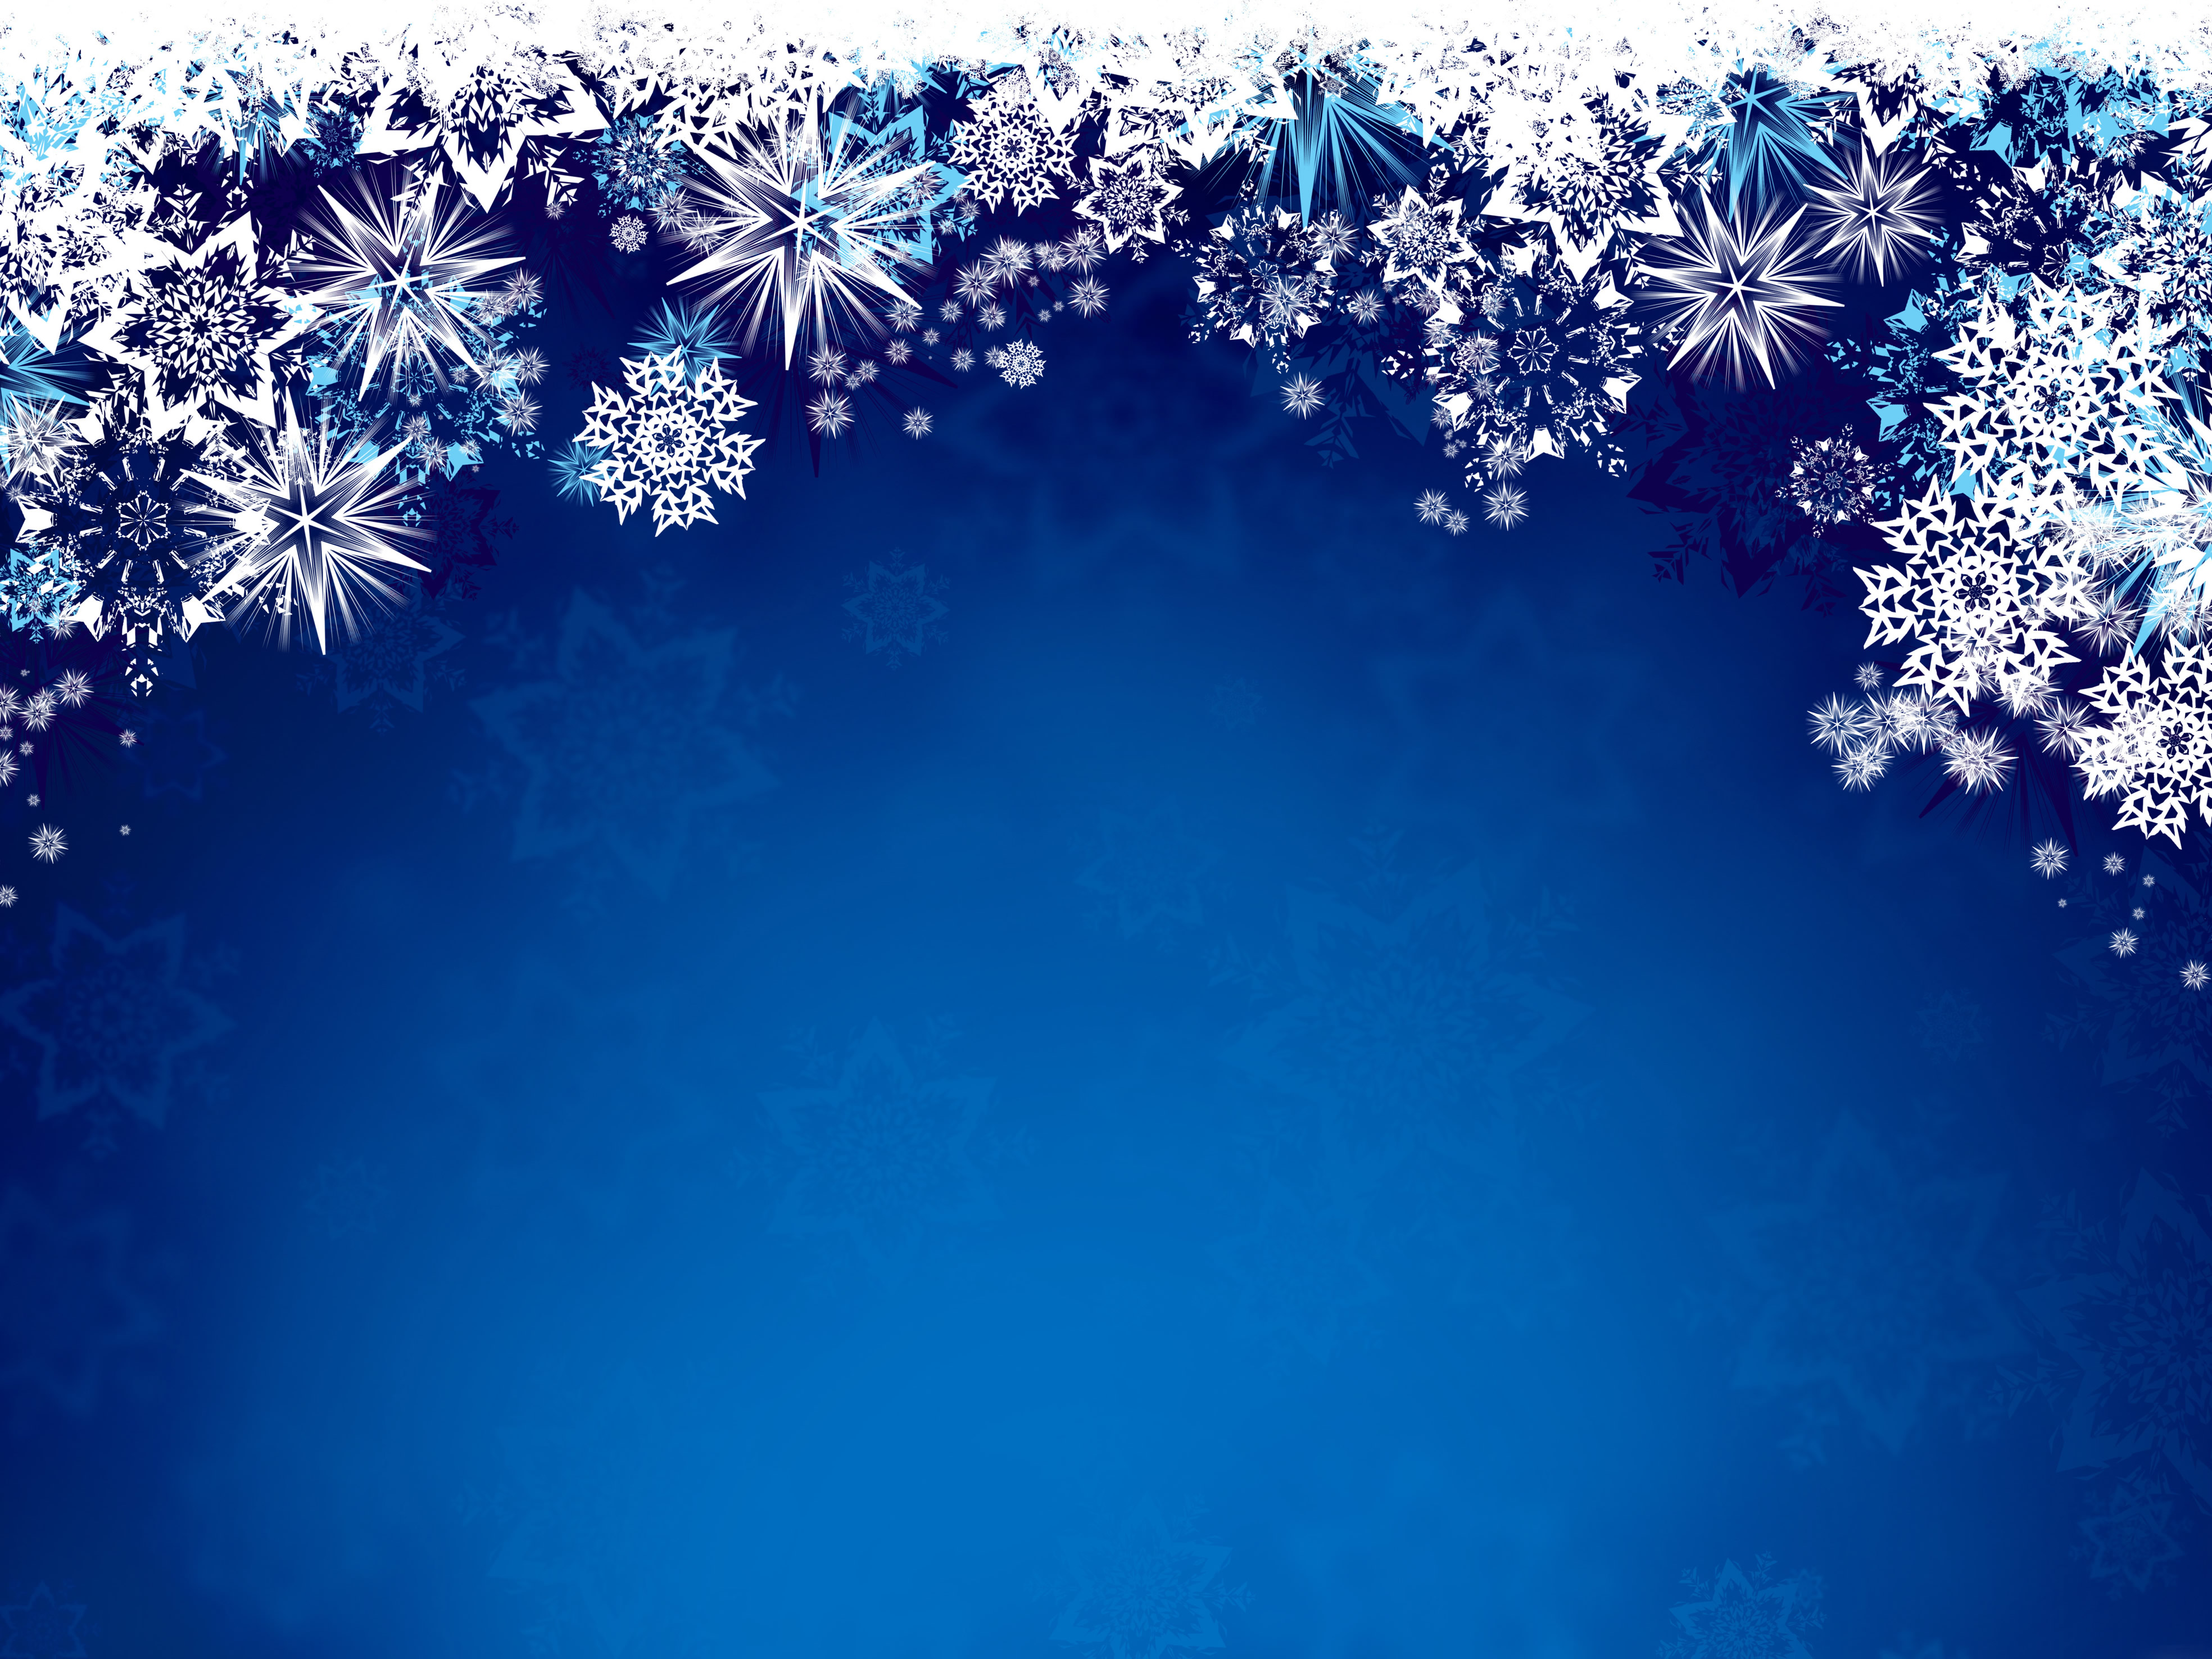  New Year Christmas texture Christmas and New Year texture background